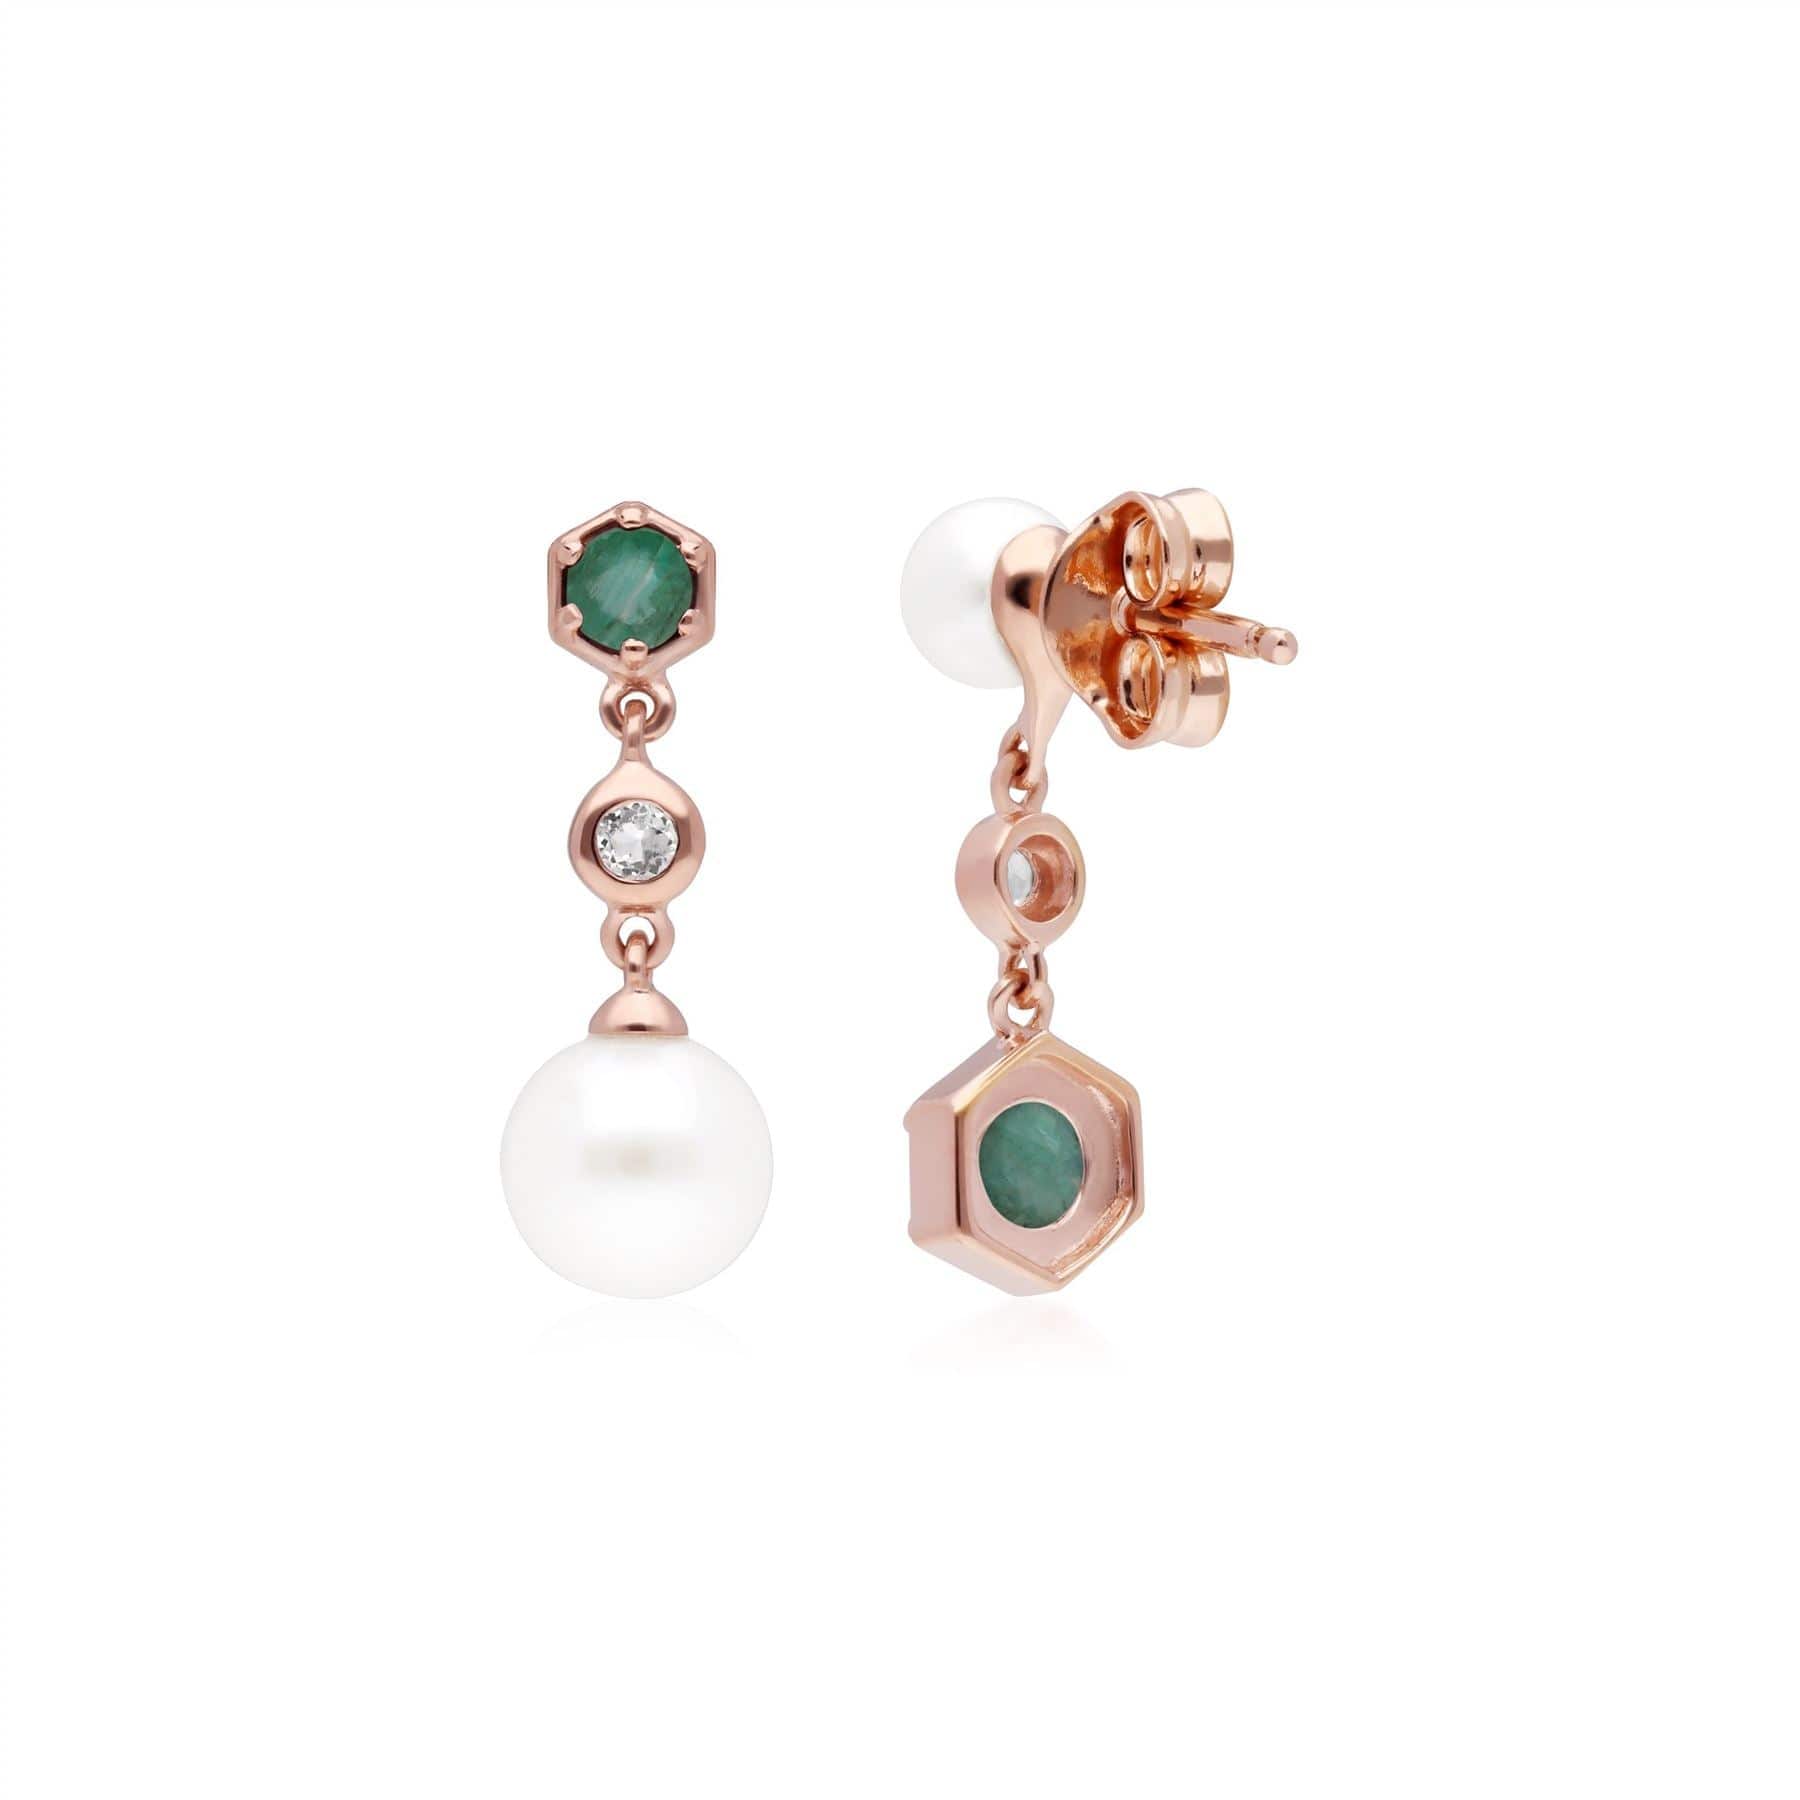 270E030303925 Modern Pearl, Emerald & Topaz Mismatched Drop Earrings in Rose Gold Plated Silver 3